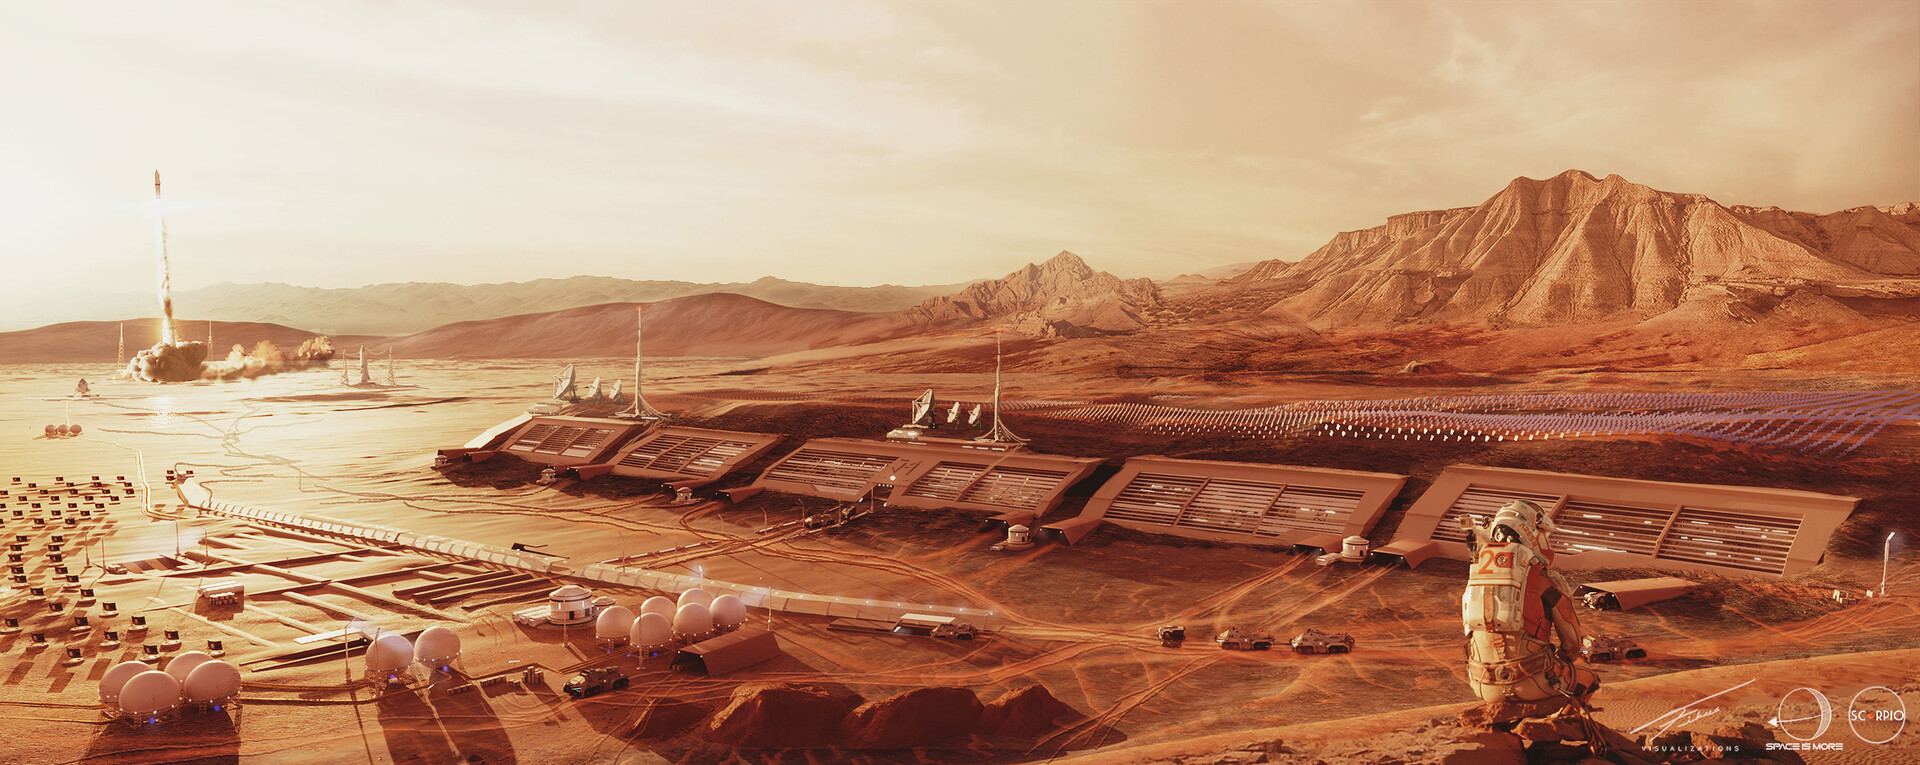 The Polish entry in a Mars Society competition for a planned community